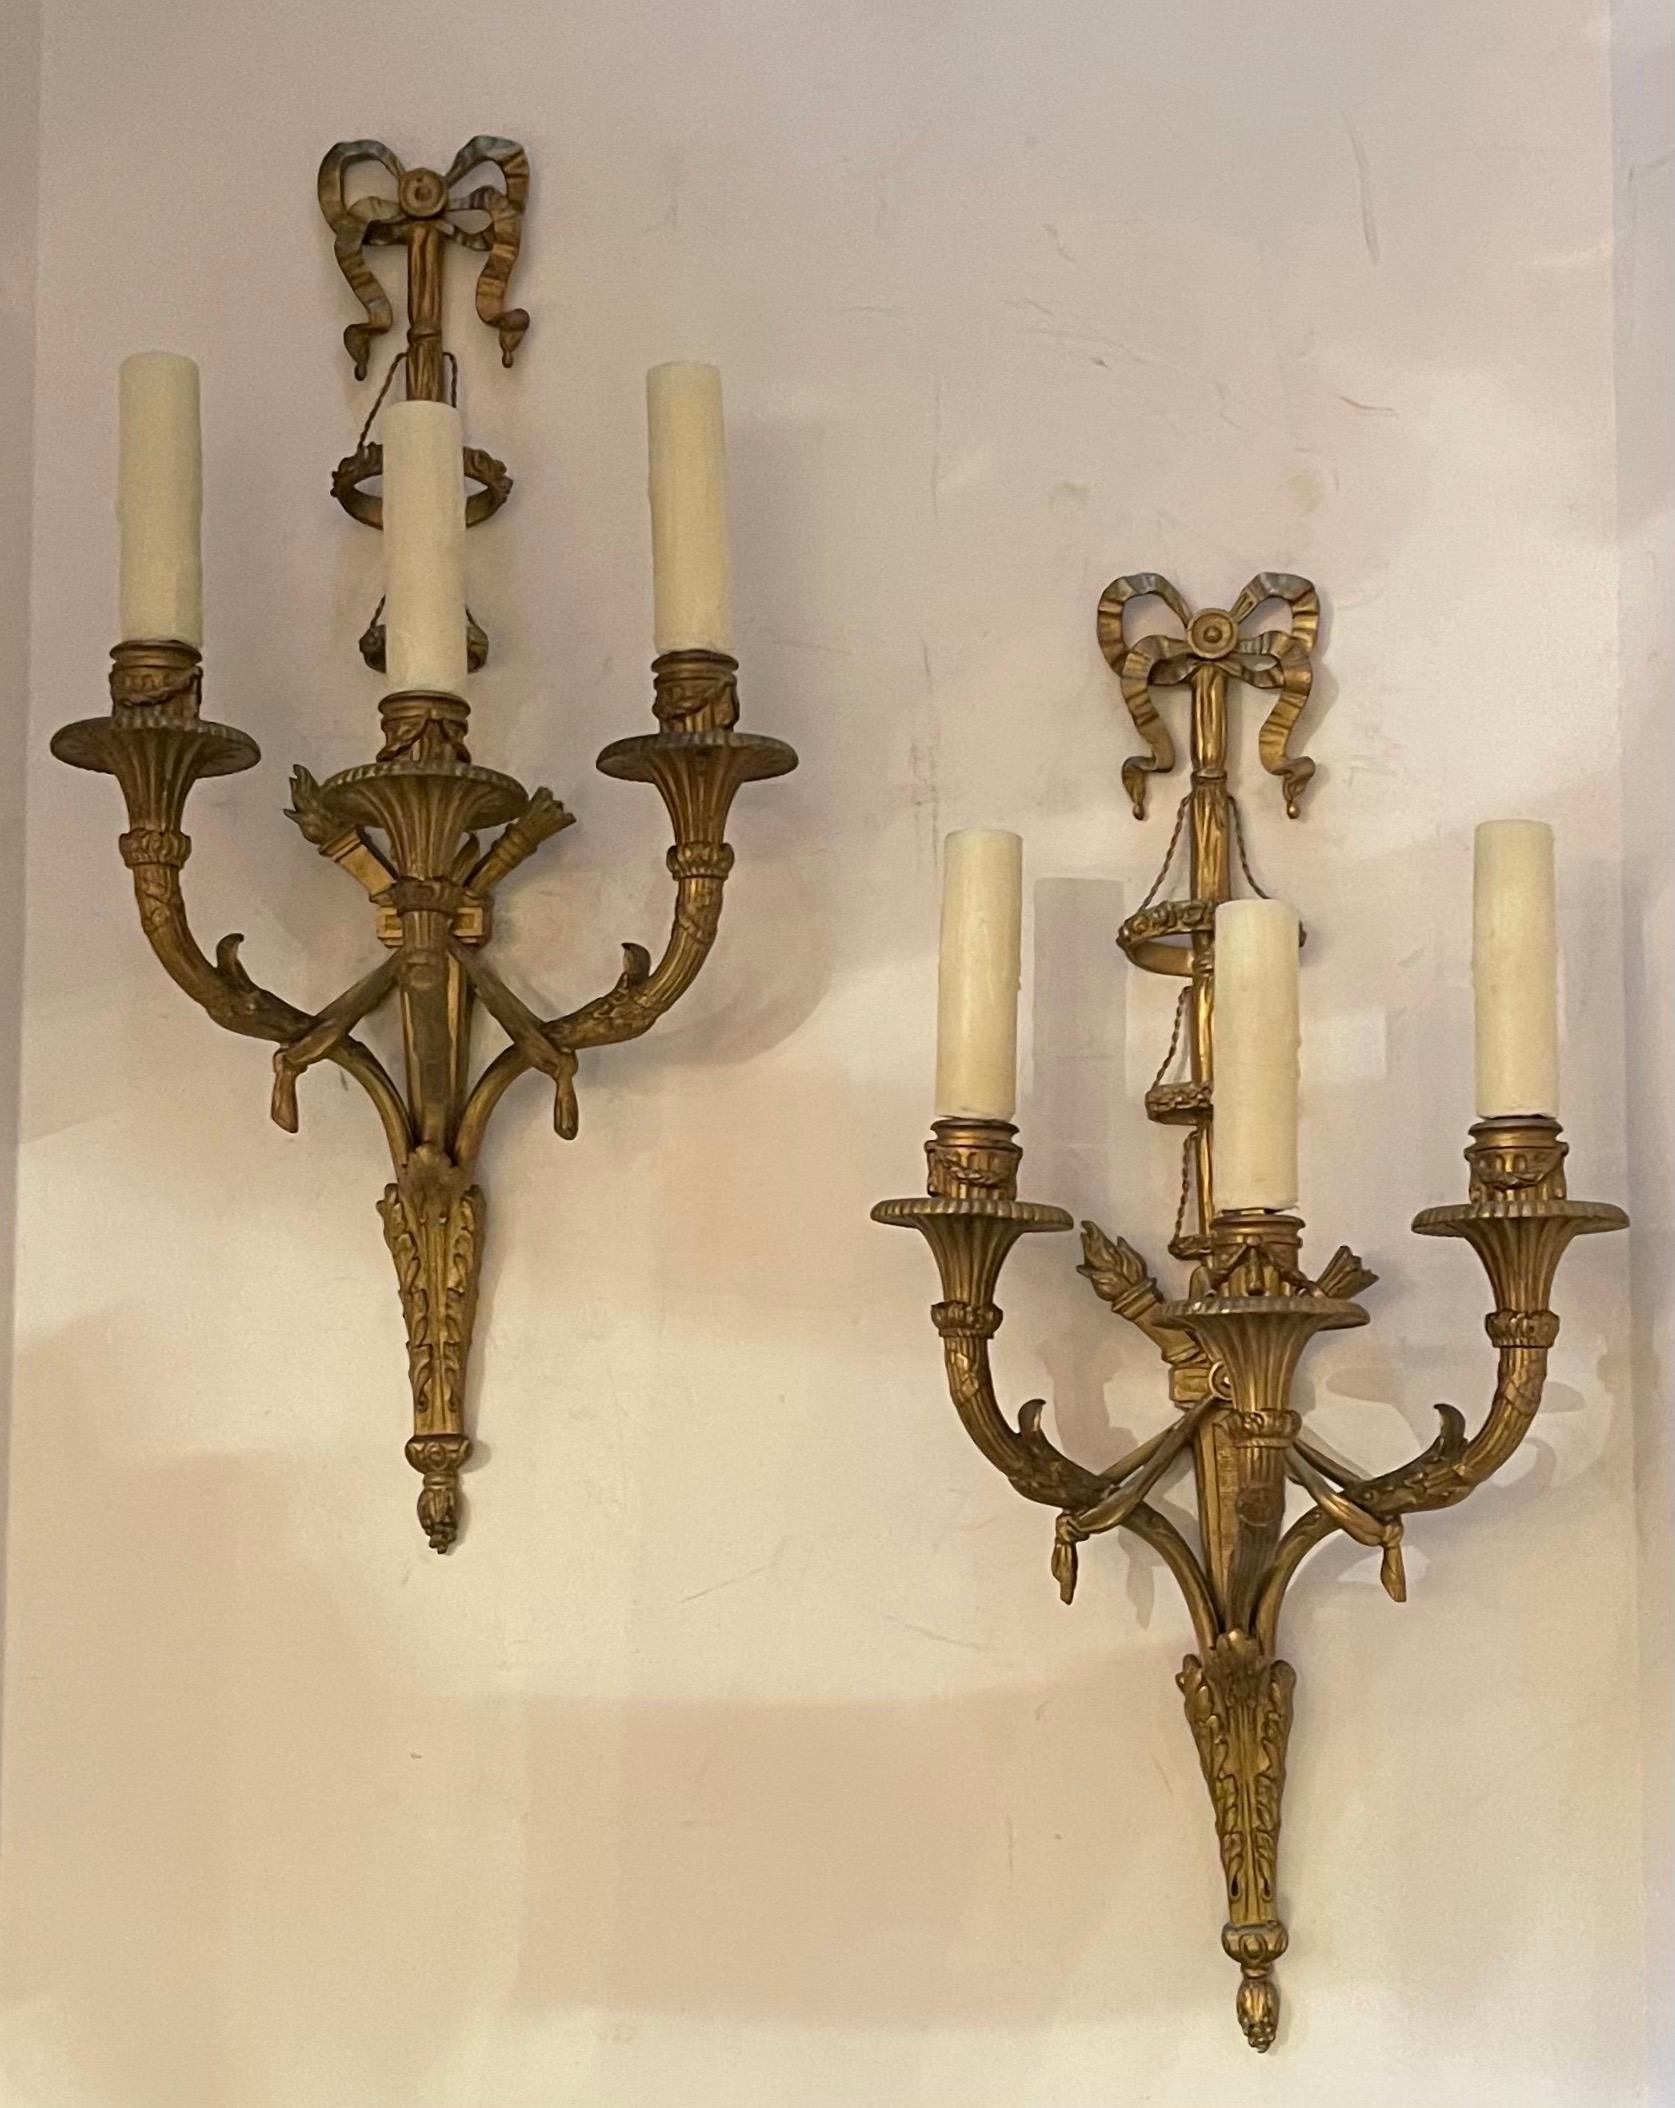 A wonderful pair of French gilt Doré bronze bow top cross Torchiere three candelabra light wall sconces with swag and baskets on the center stem in the manner of E. F. Caldwell.